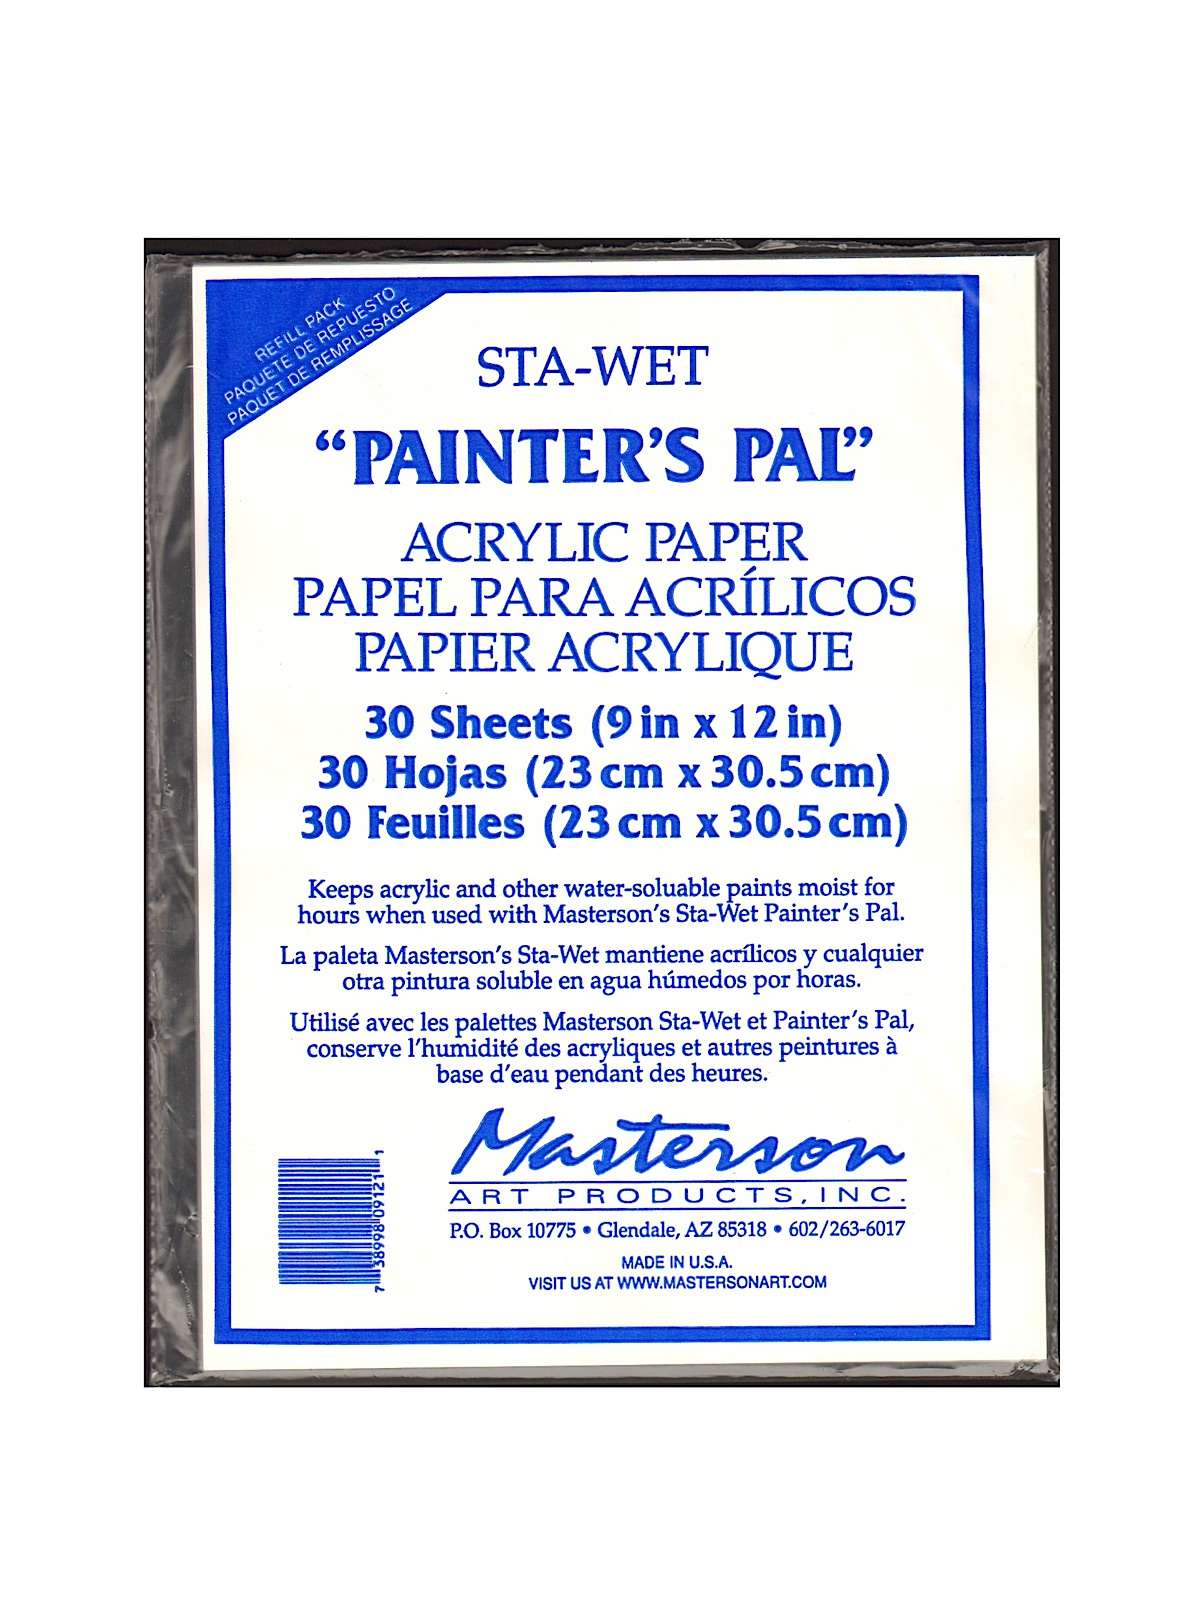 Sta-wet Painters Pal Palette Painters Pal Acrylic Paper Pack Of 30 9 In. X 12 In.